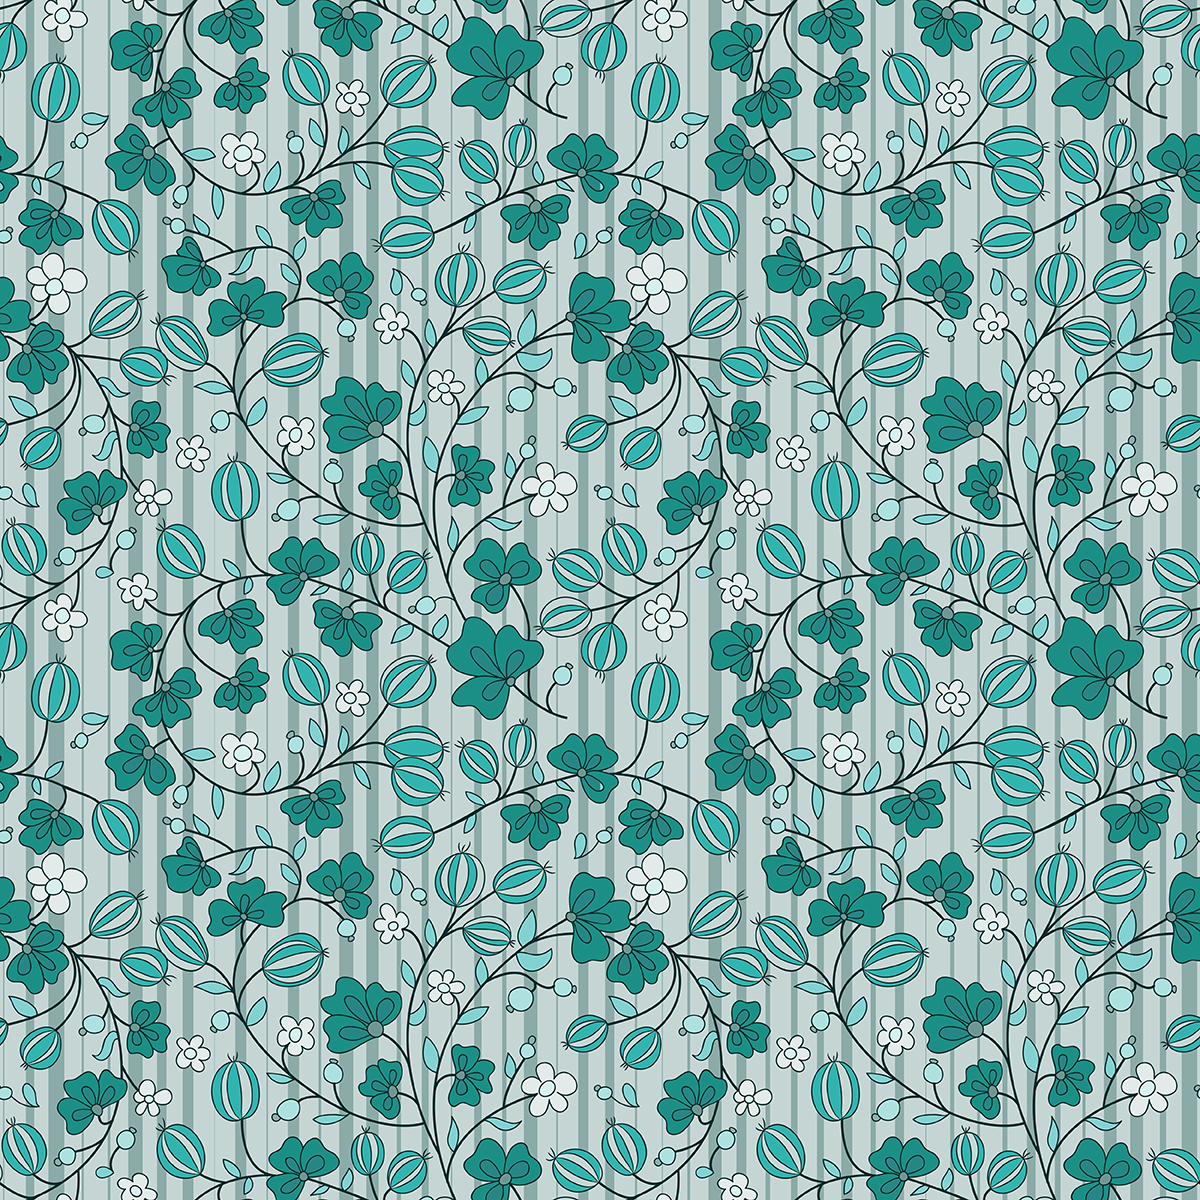 A pattern of leaves and flowers